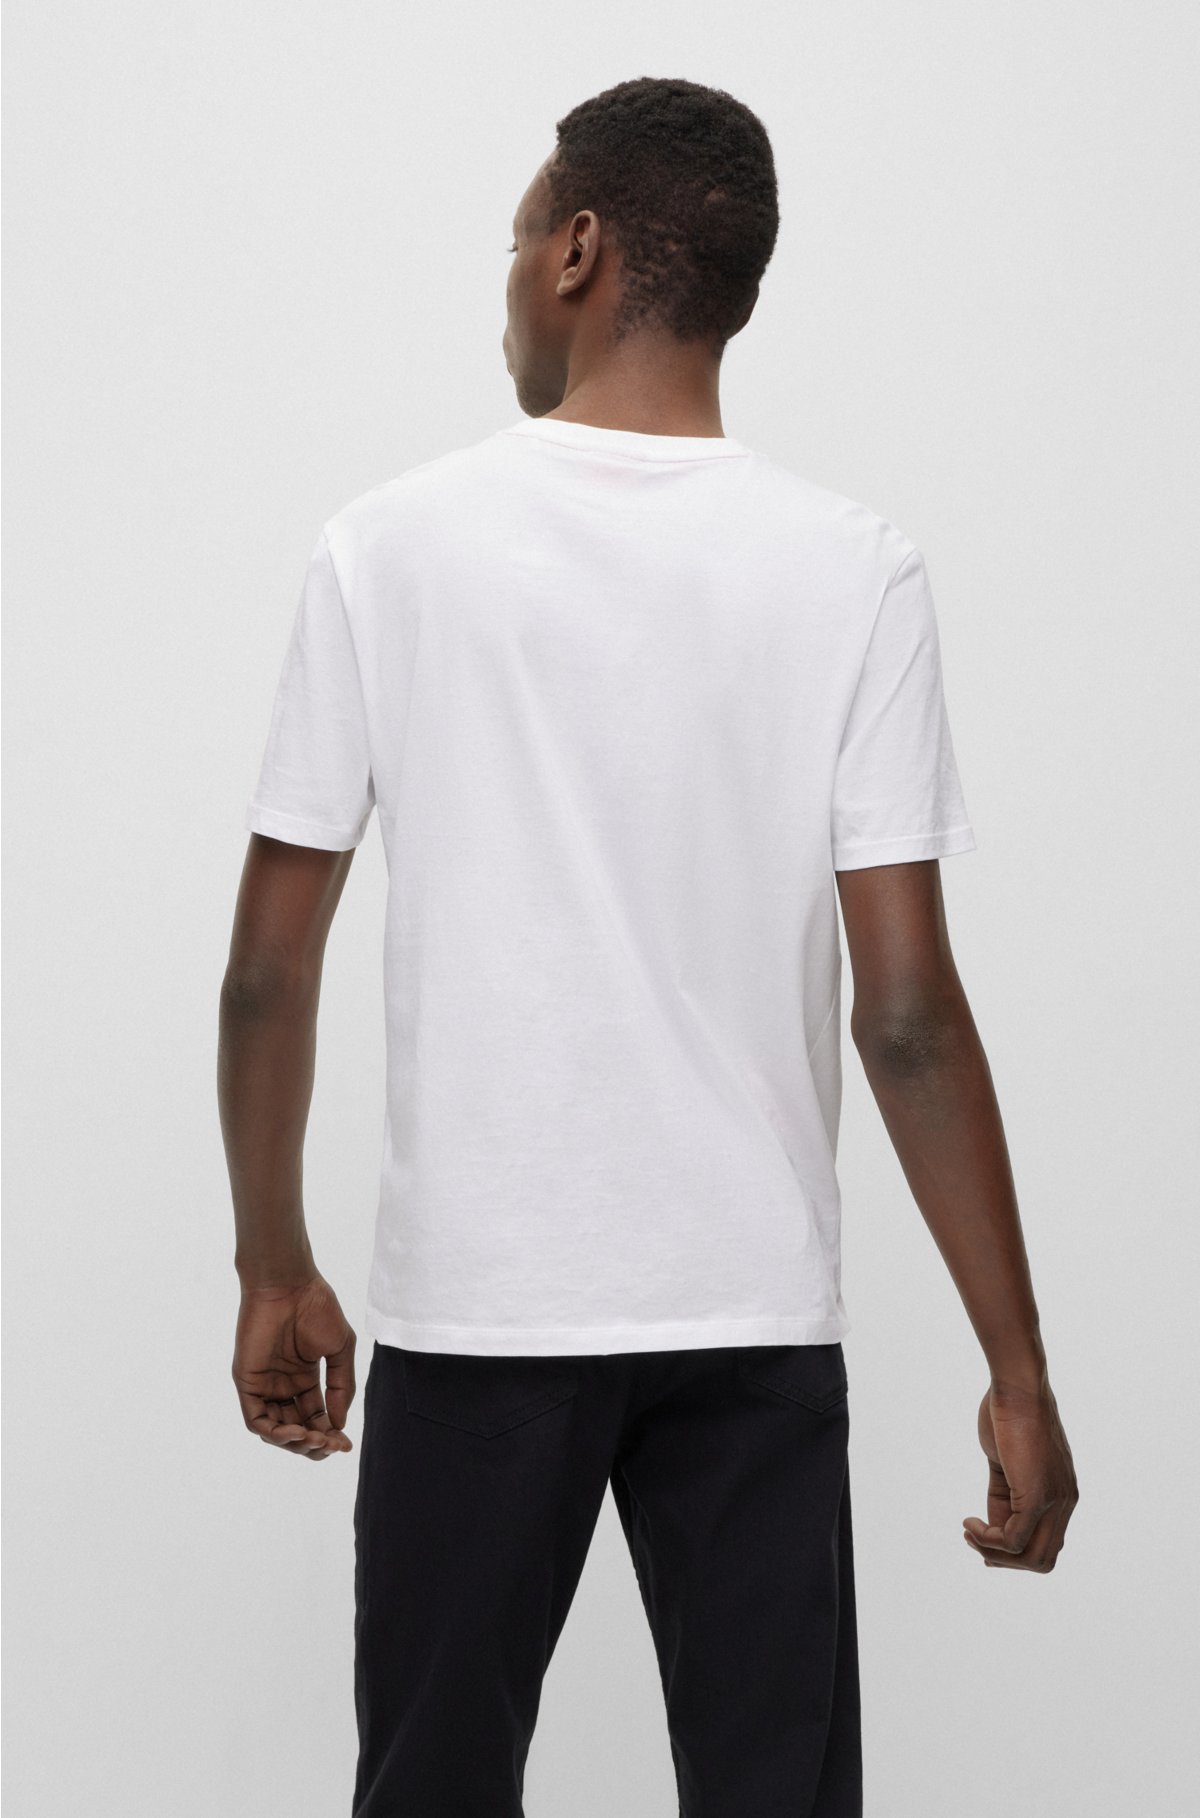 HUGO - Crew-neck T-shirt in cotton jersey with box logo